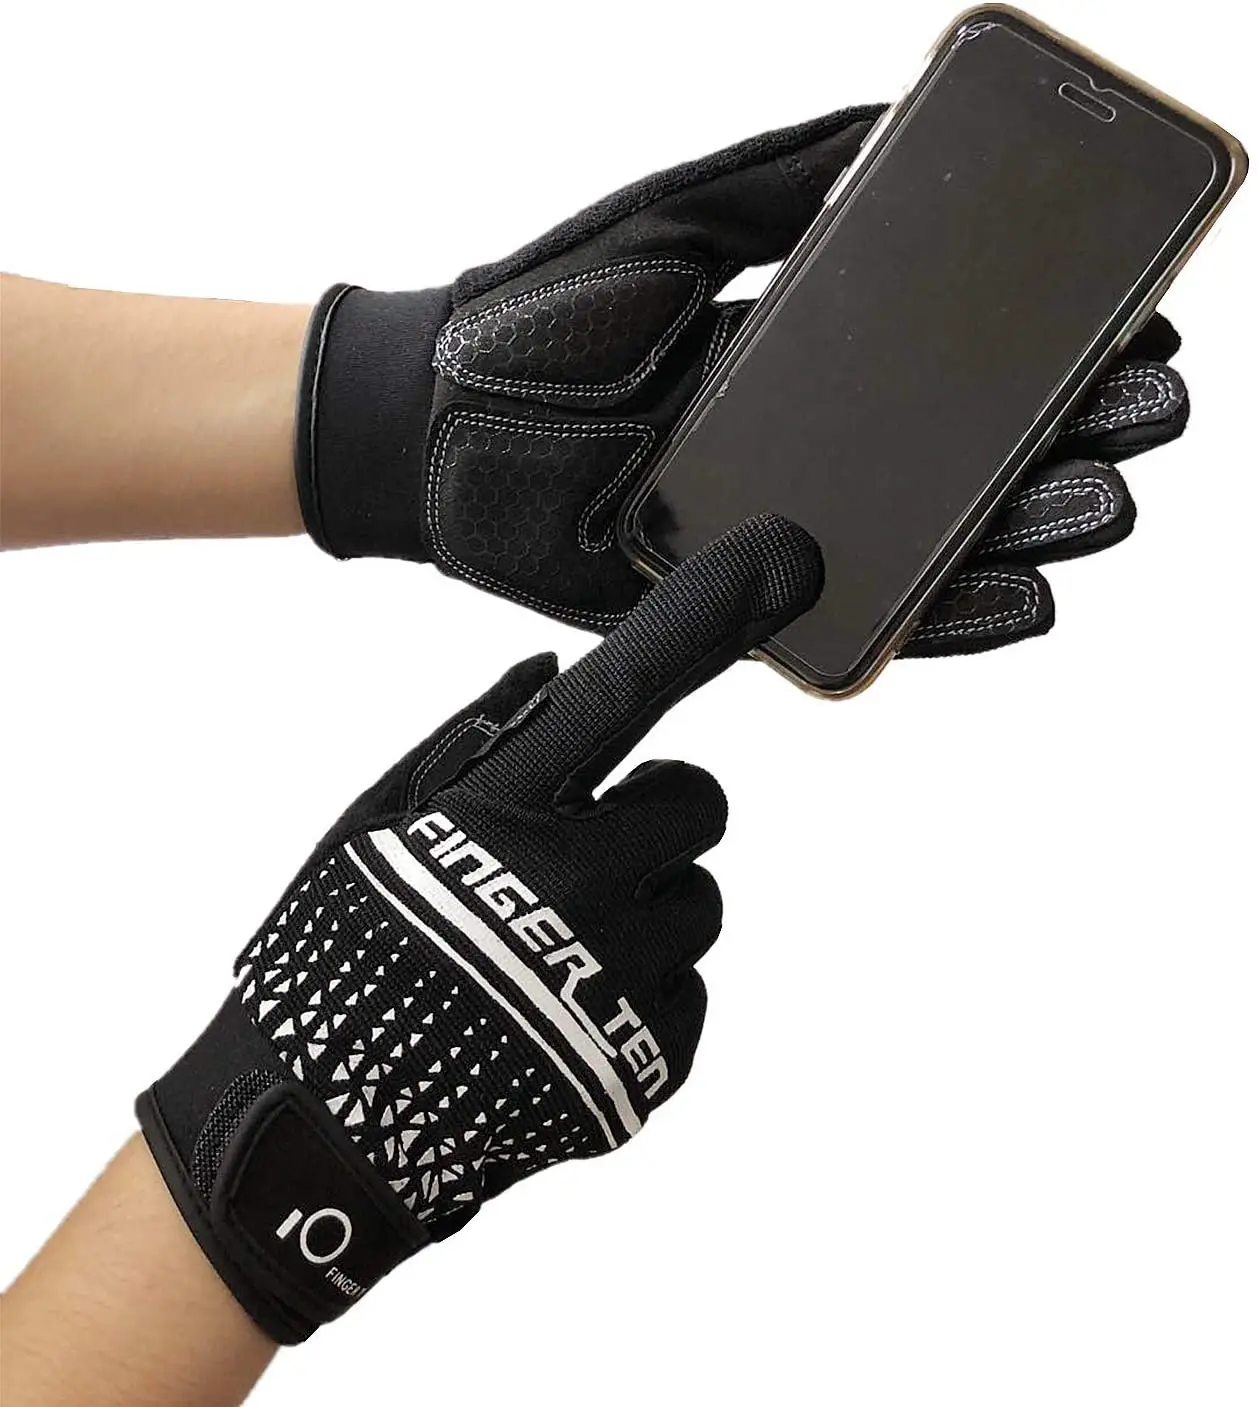 Top-rated Full Finger Gym Glove for Sports and Exercise